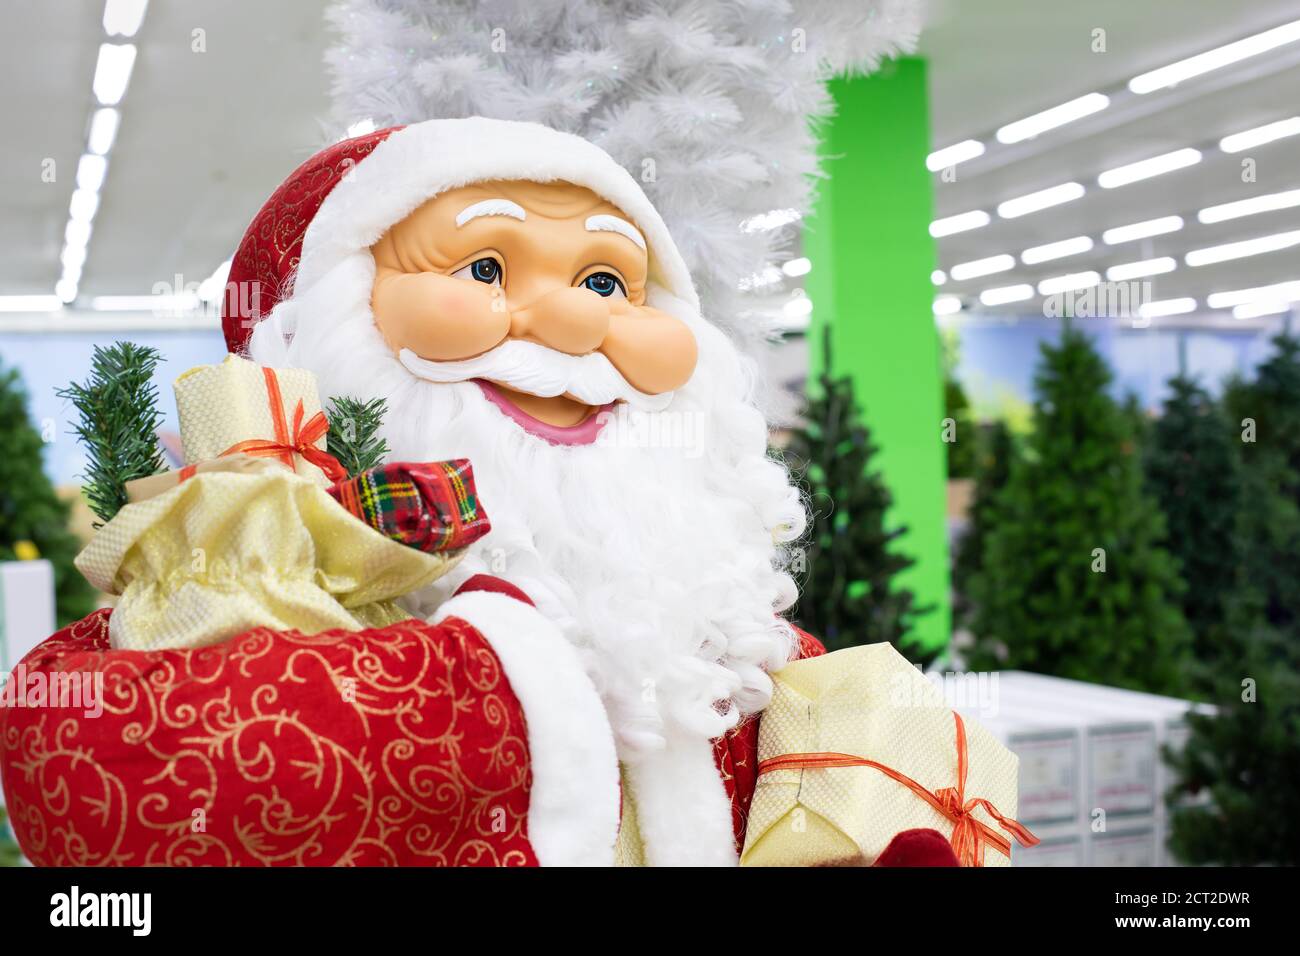 Portrait of a puppet Santa Claus close-up side view. Smiling Christmas santa carrying gifts in his hands. Sale christmas tree on background Stock Photo